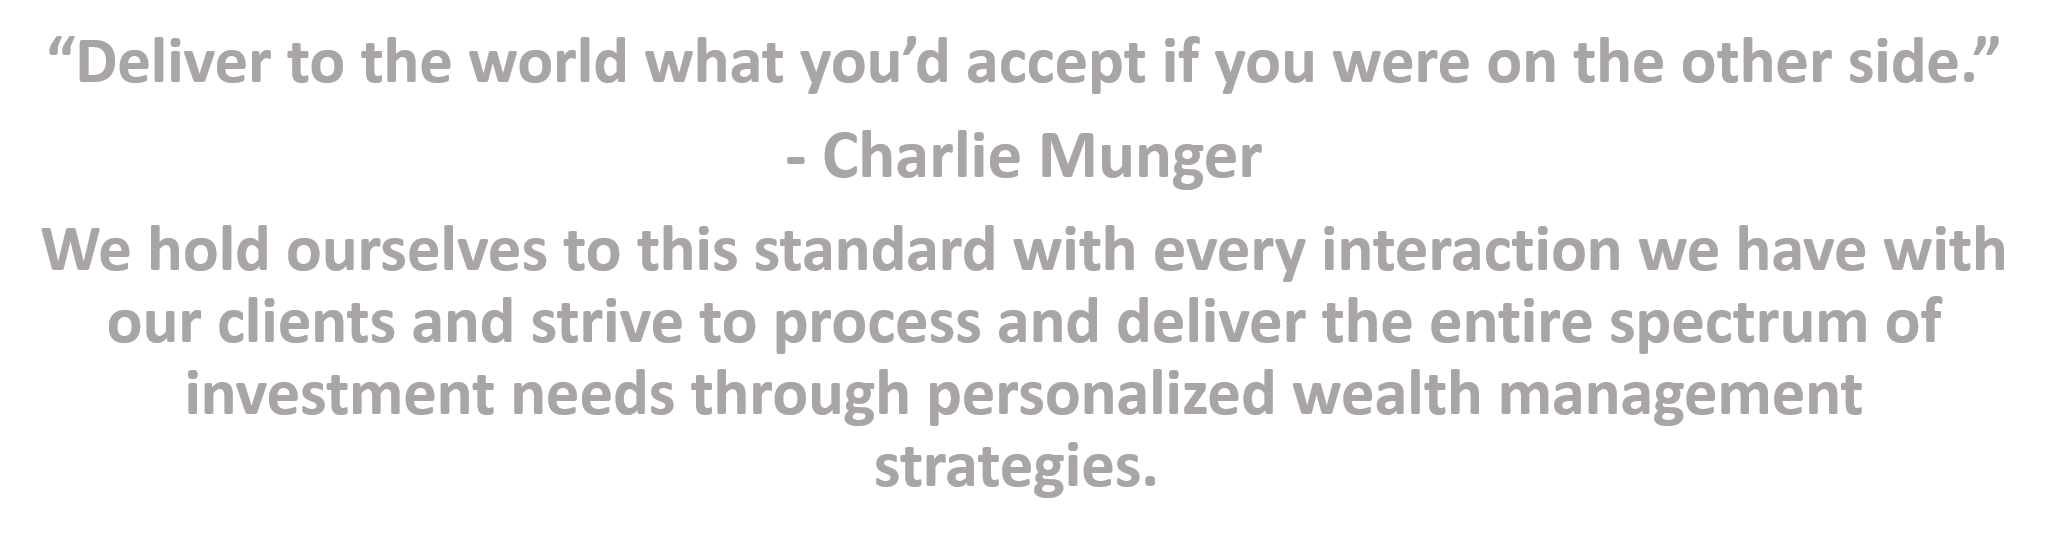 Munger7 quote.png